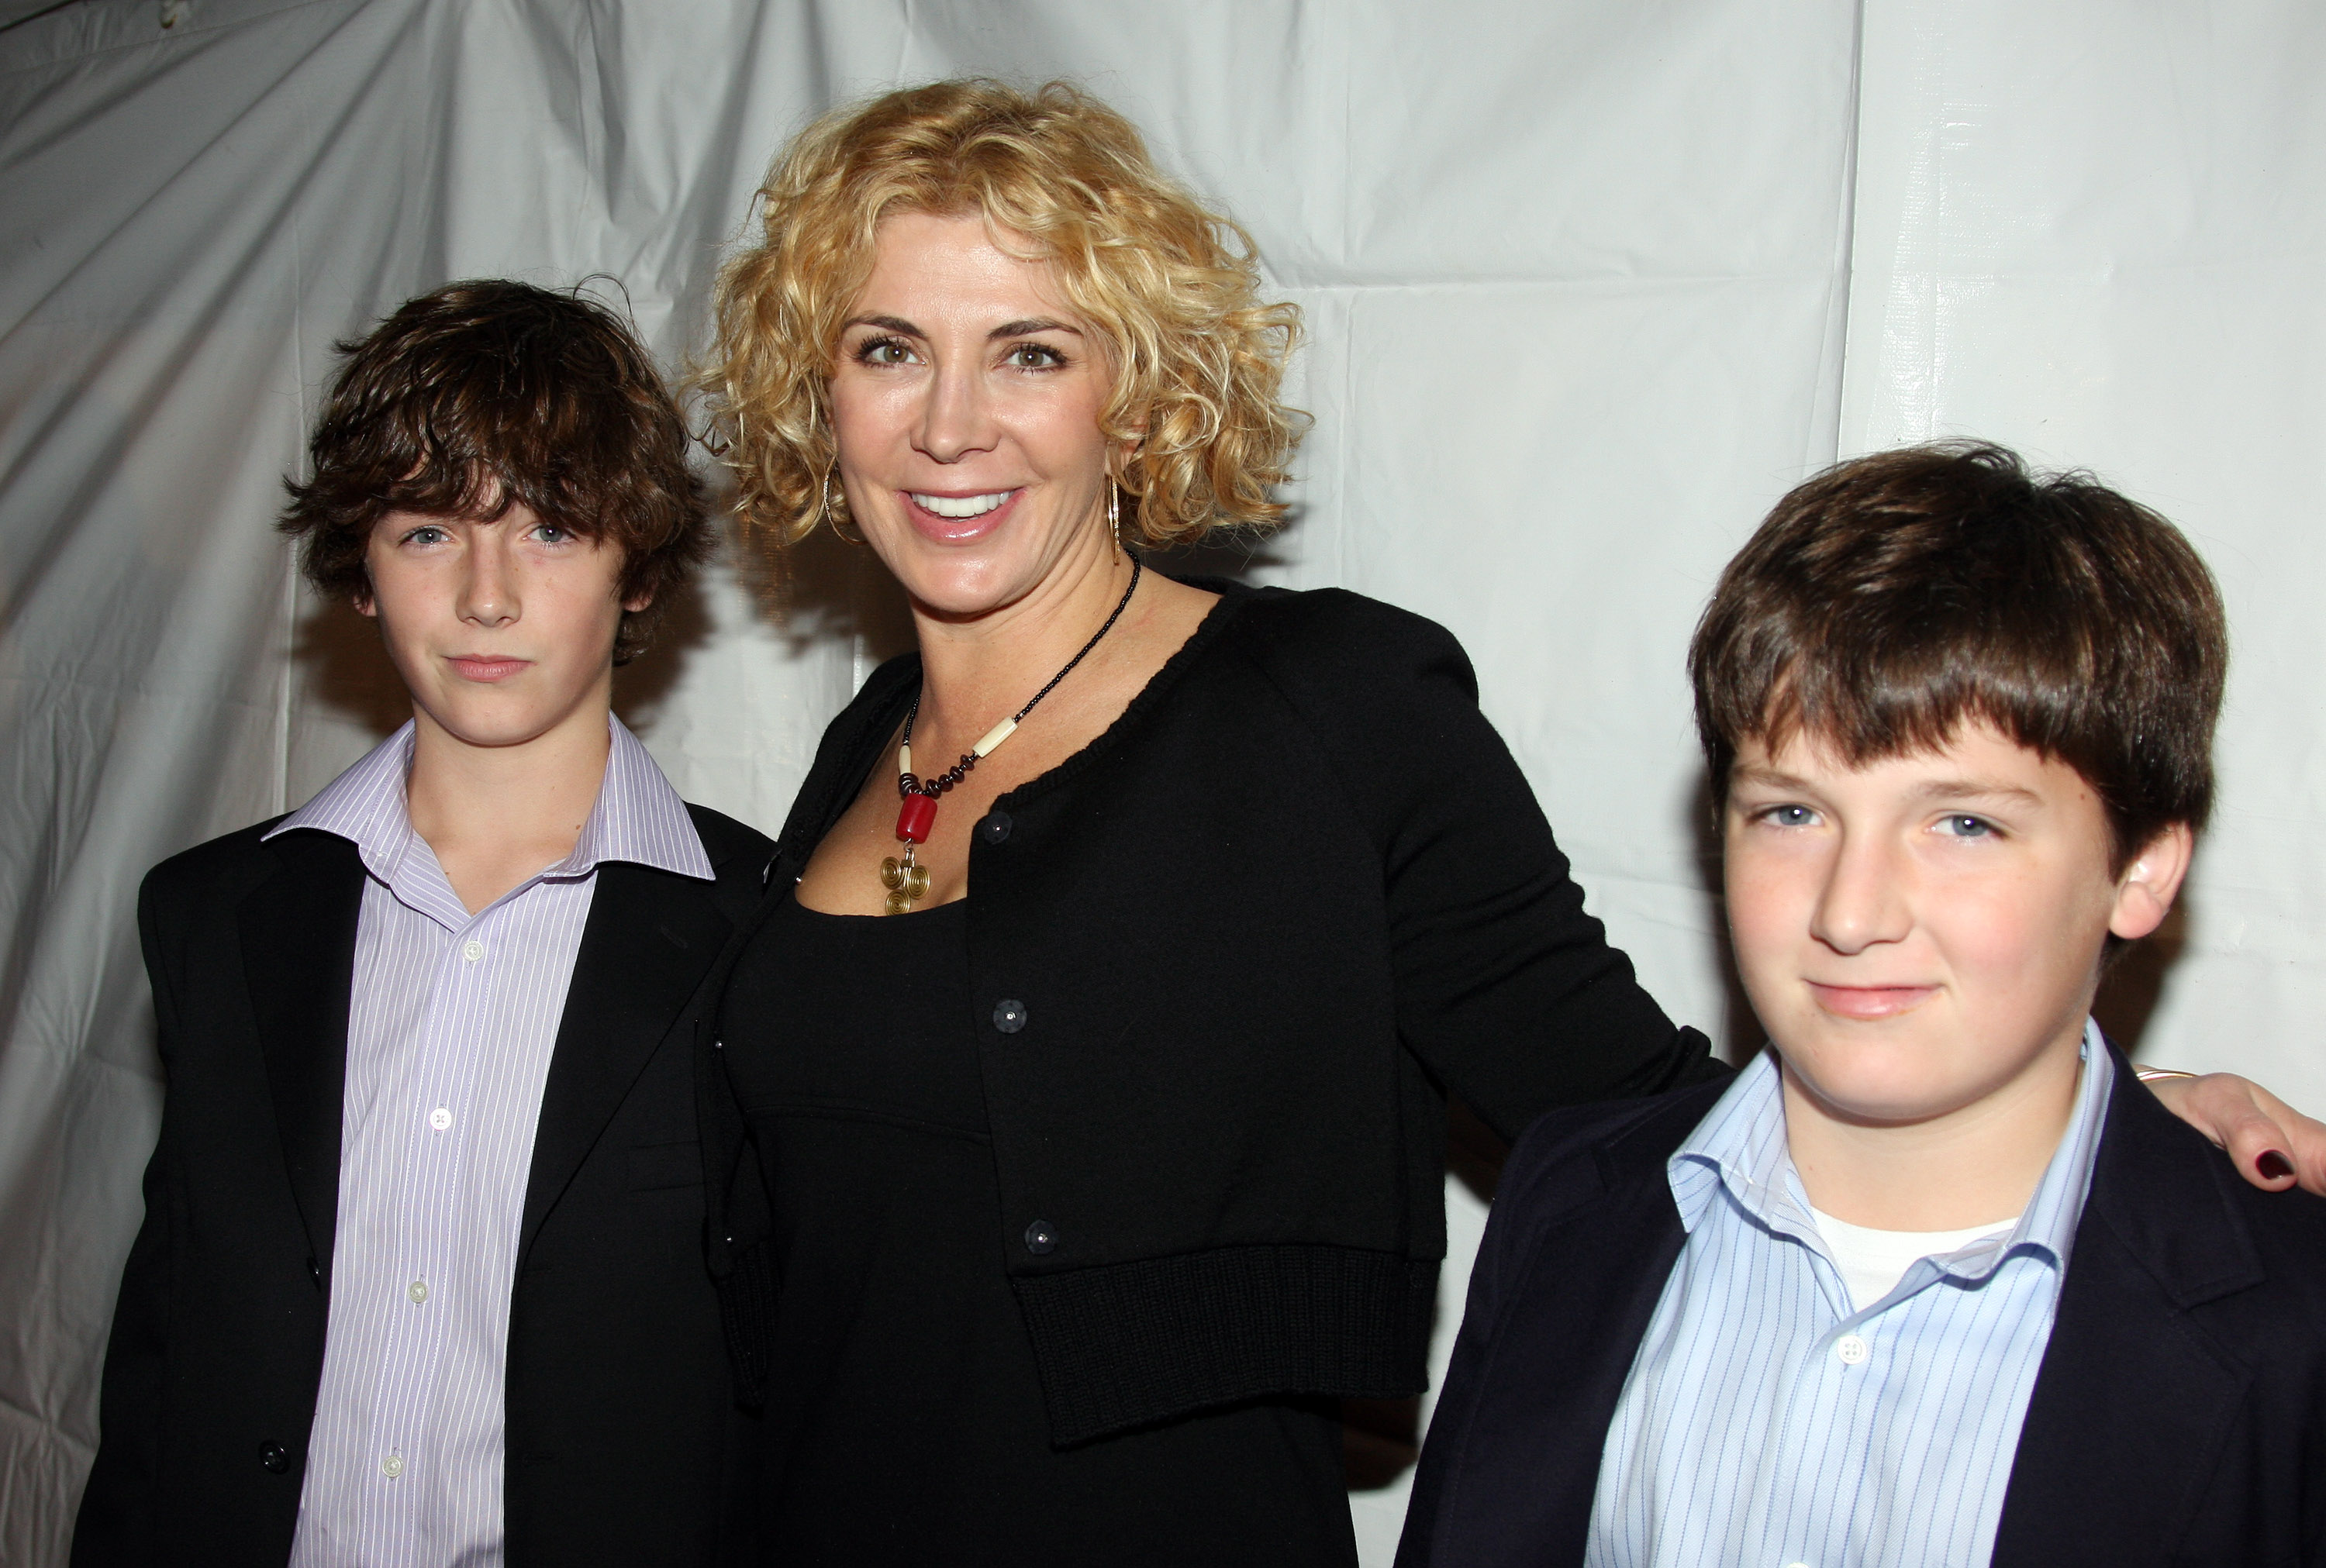 Natasha Richardson with her sons, Micheál Richardson and Daniel Neeson, at the Broadway opening of "Billy Elliot The Musical" in New York City on November 13, 2008 | Source: Getty Images